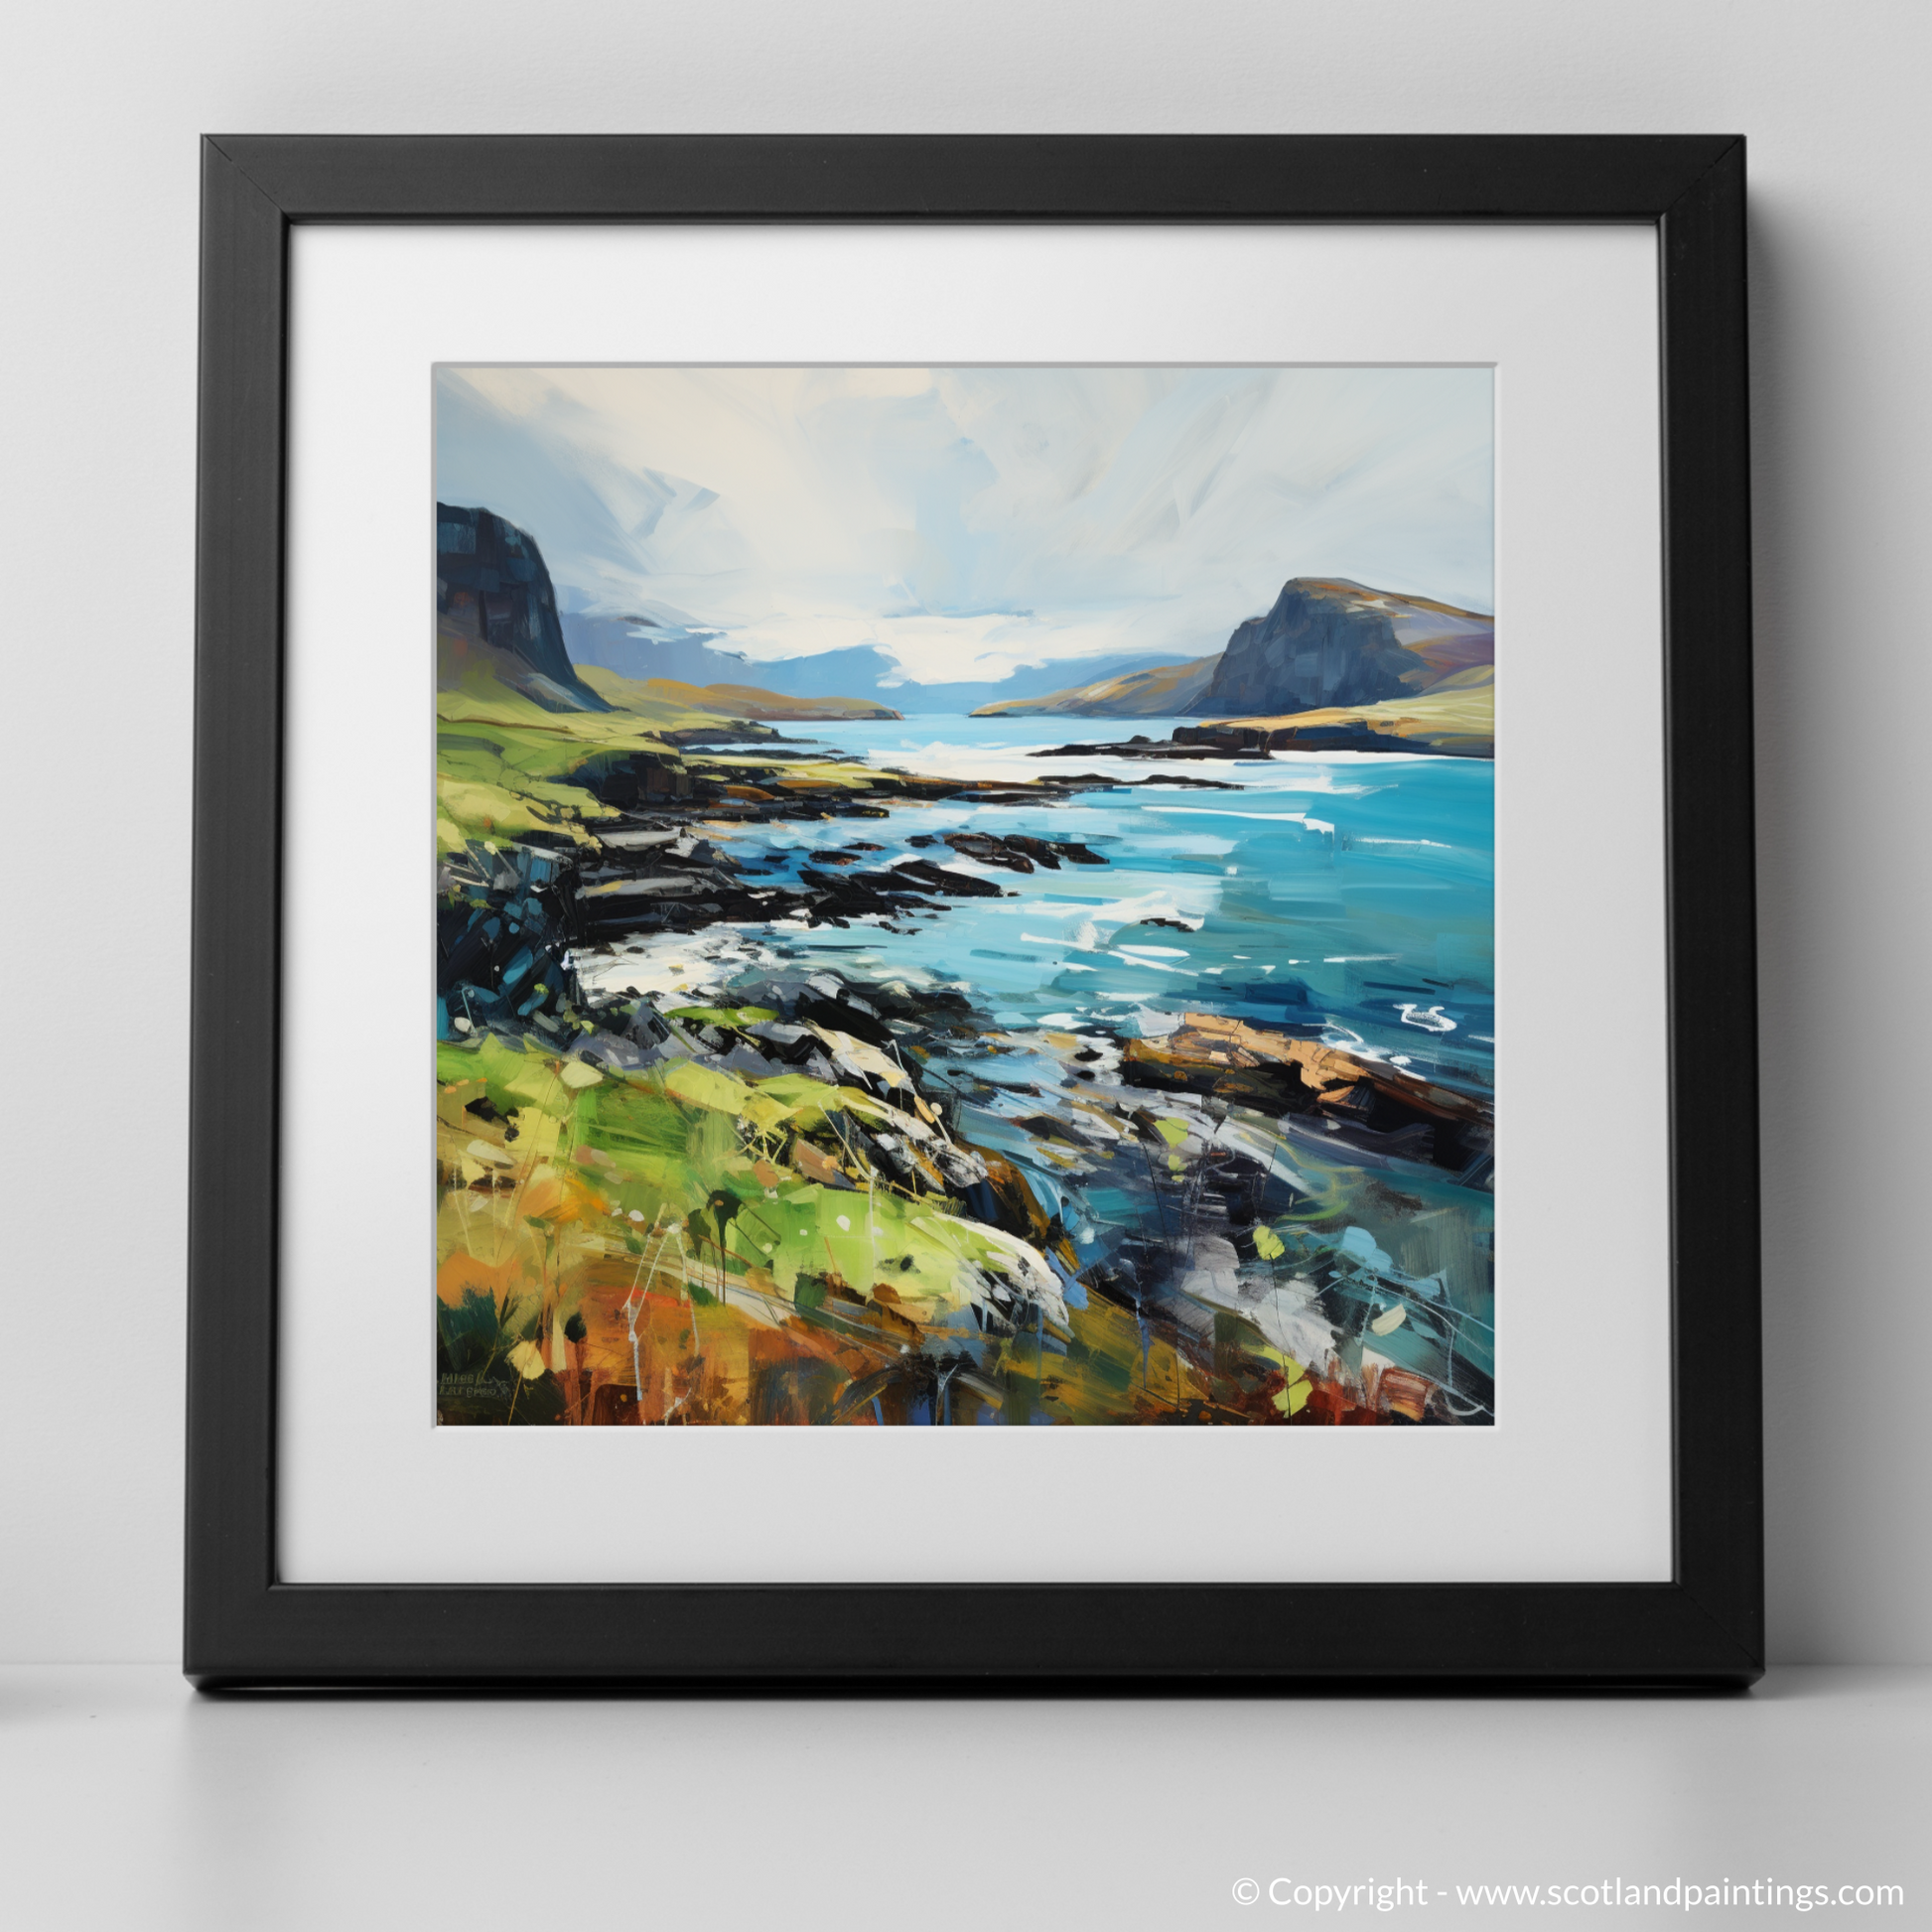 Art Print of Ardtun Bay, Isle of Mull with a black frame